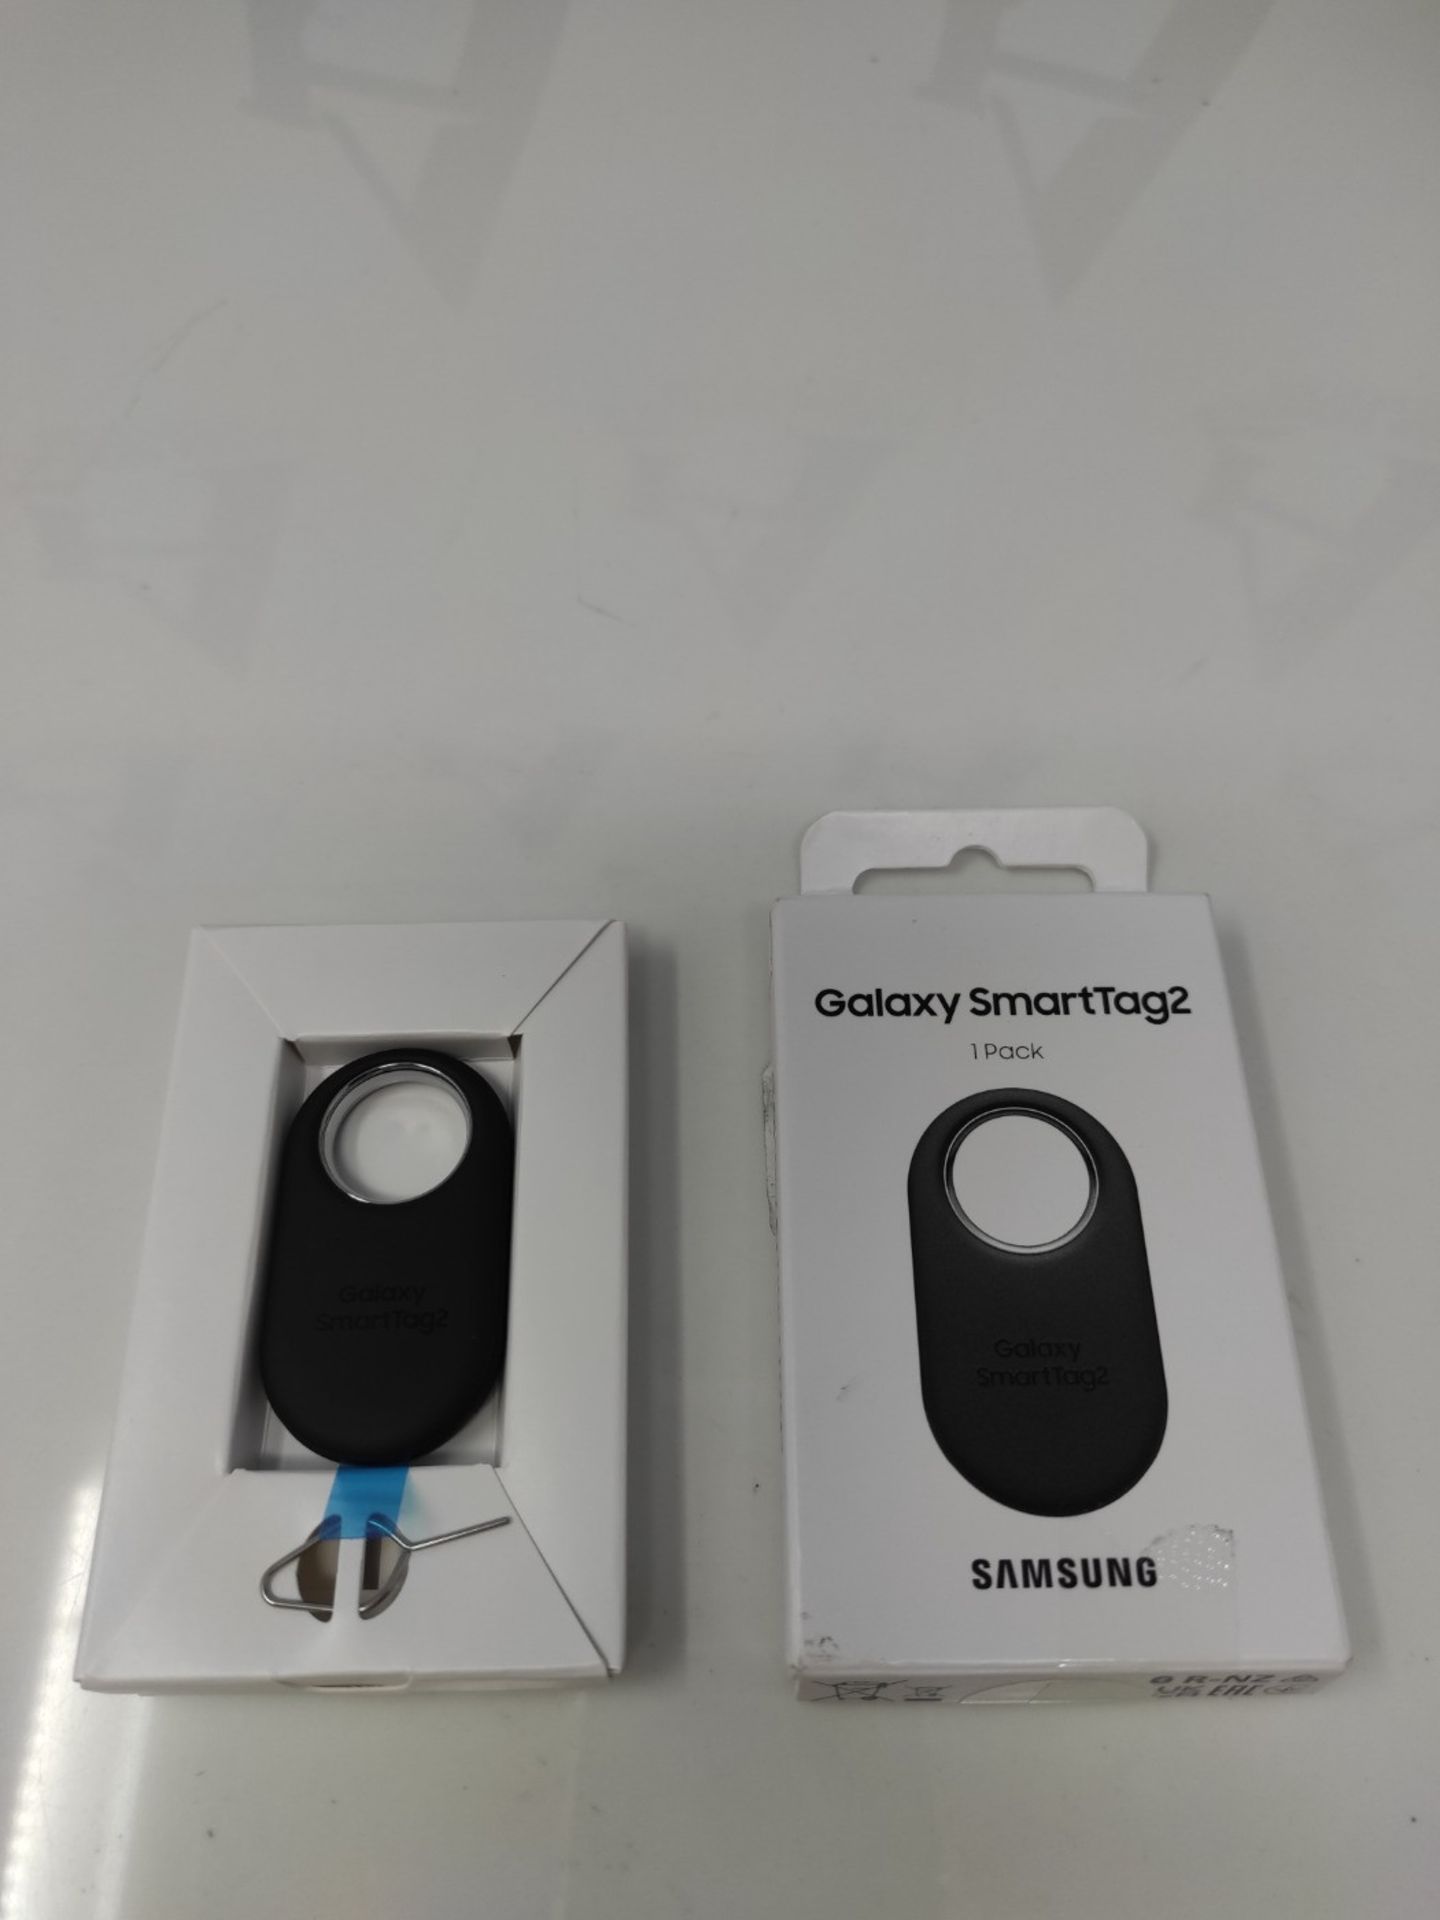 Samsung Galaxy SmartTag2 (1 piece) Bluetooth locator with Lost Mode, compact design, l - Image 2 of 2